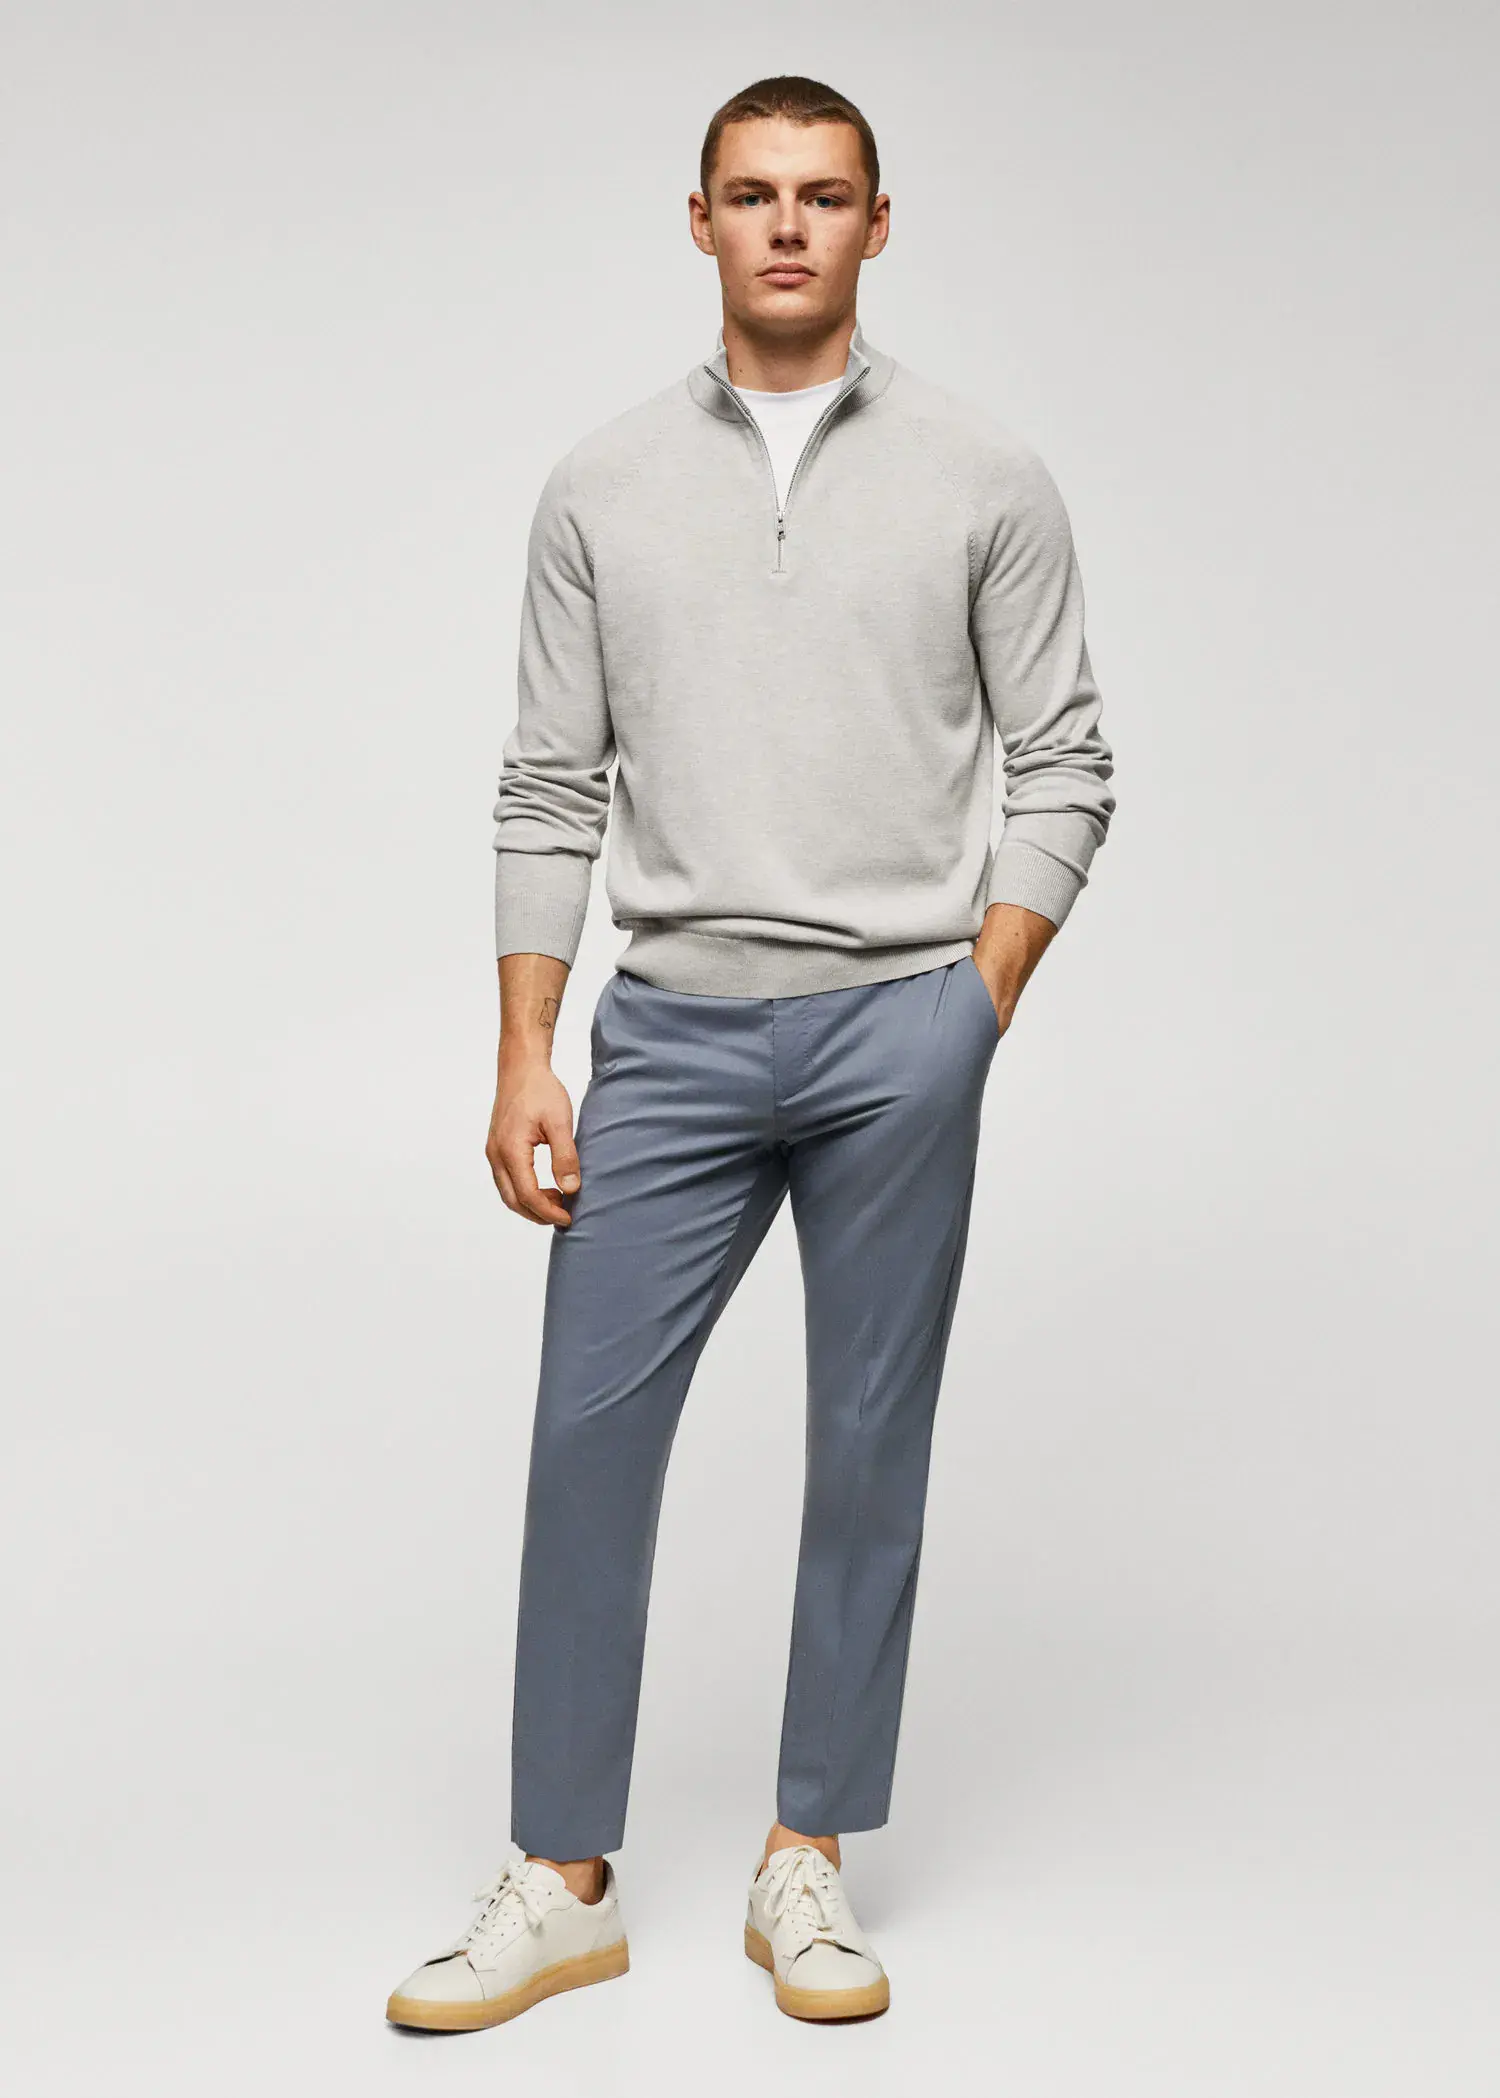 Mango Cotton sweater with neck zipper. a man wearing a gray sweater and blue pants. 